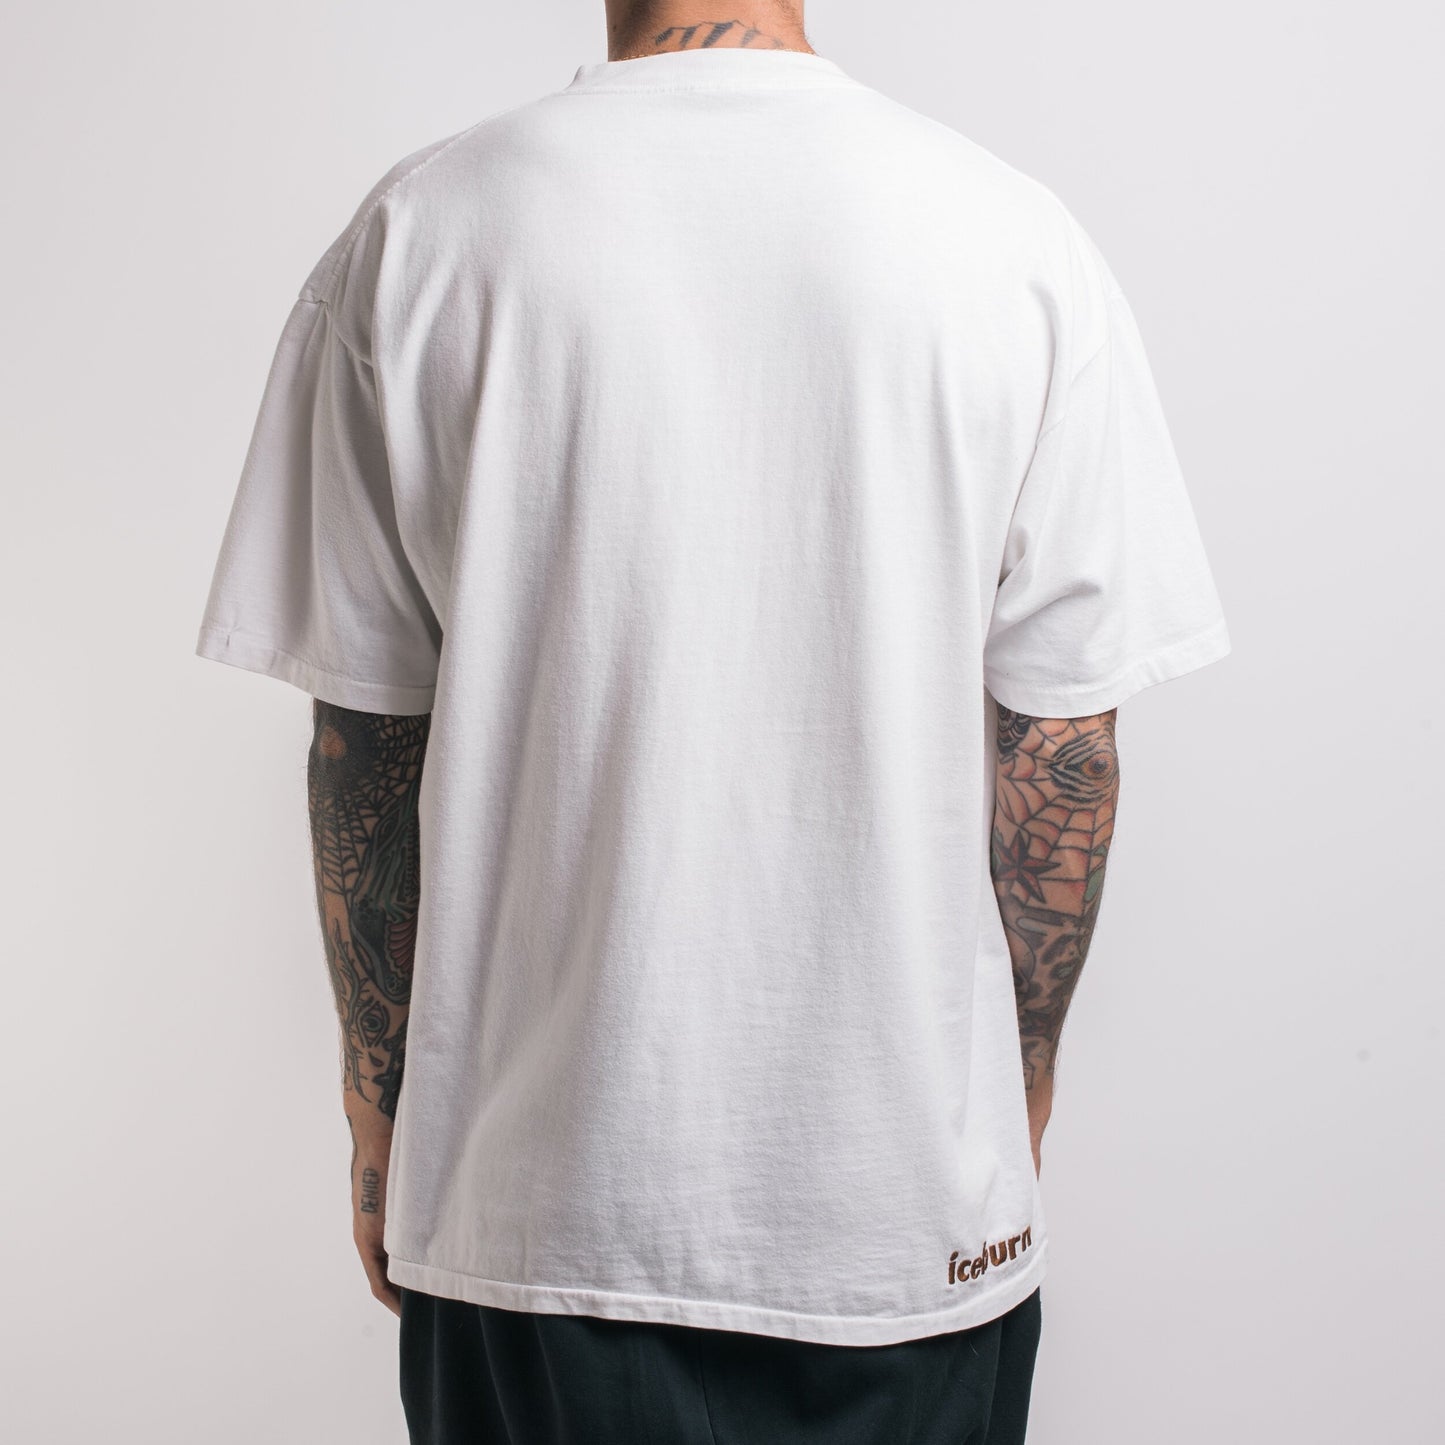 Vintage 90’s Iceburn Embroidery T-Shirt